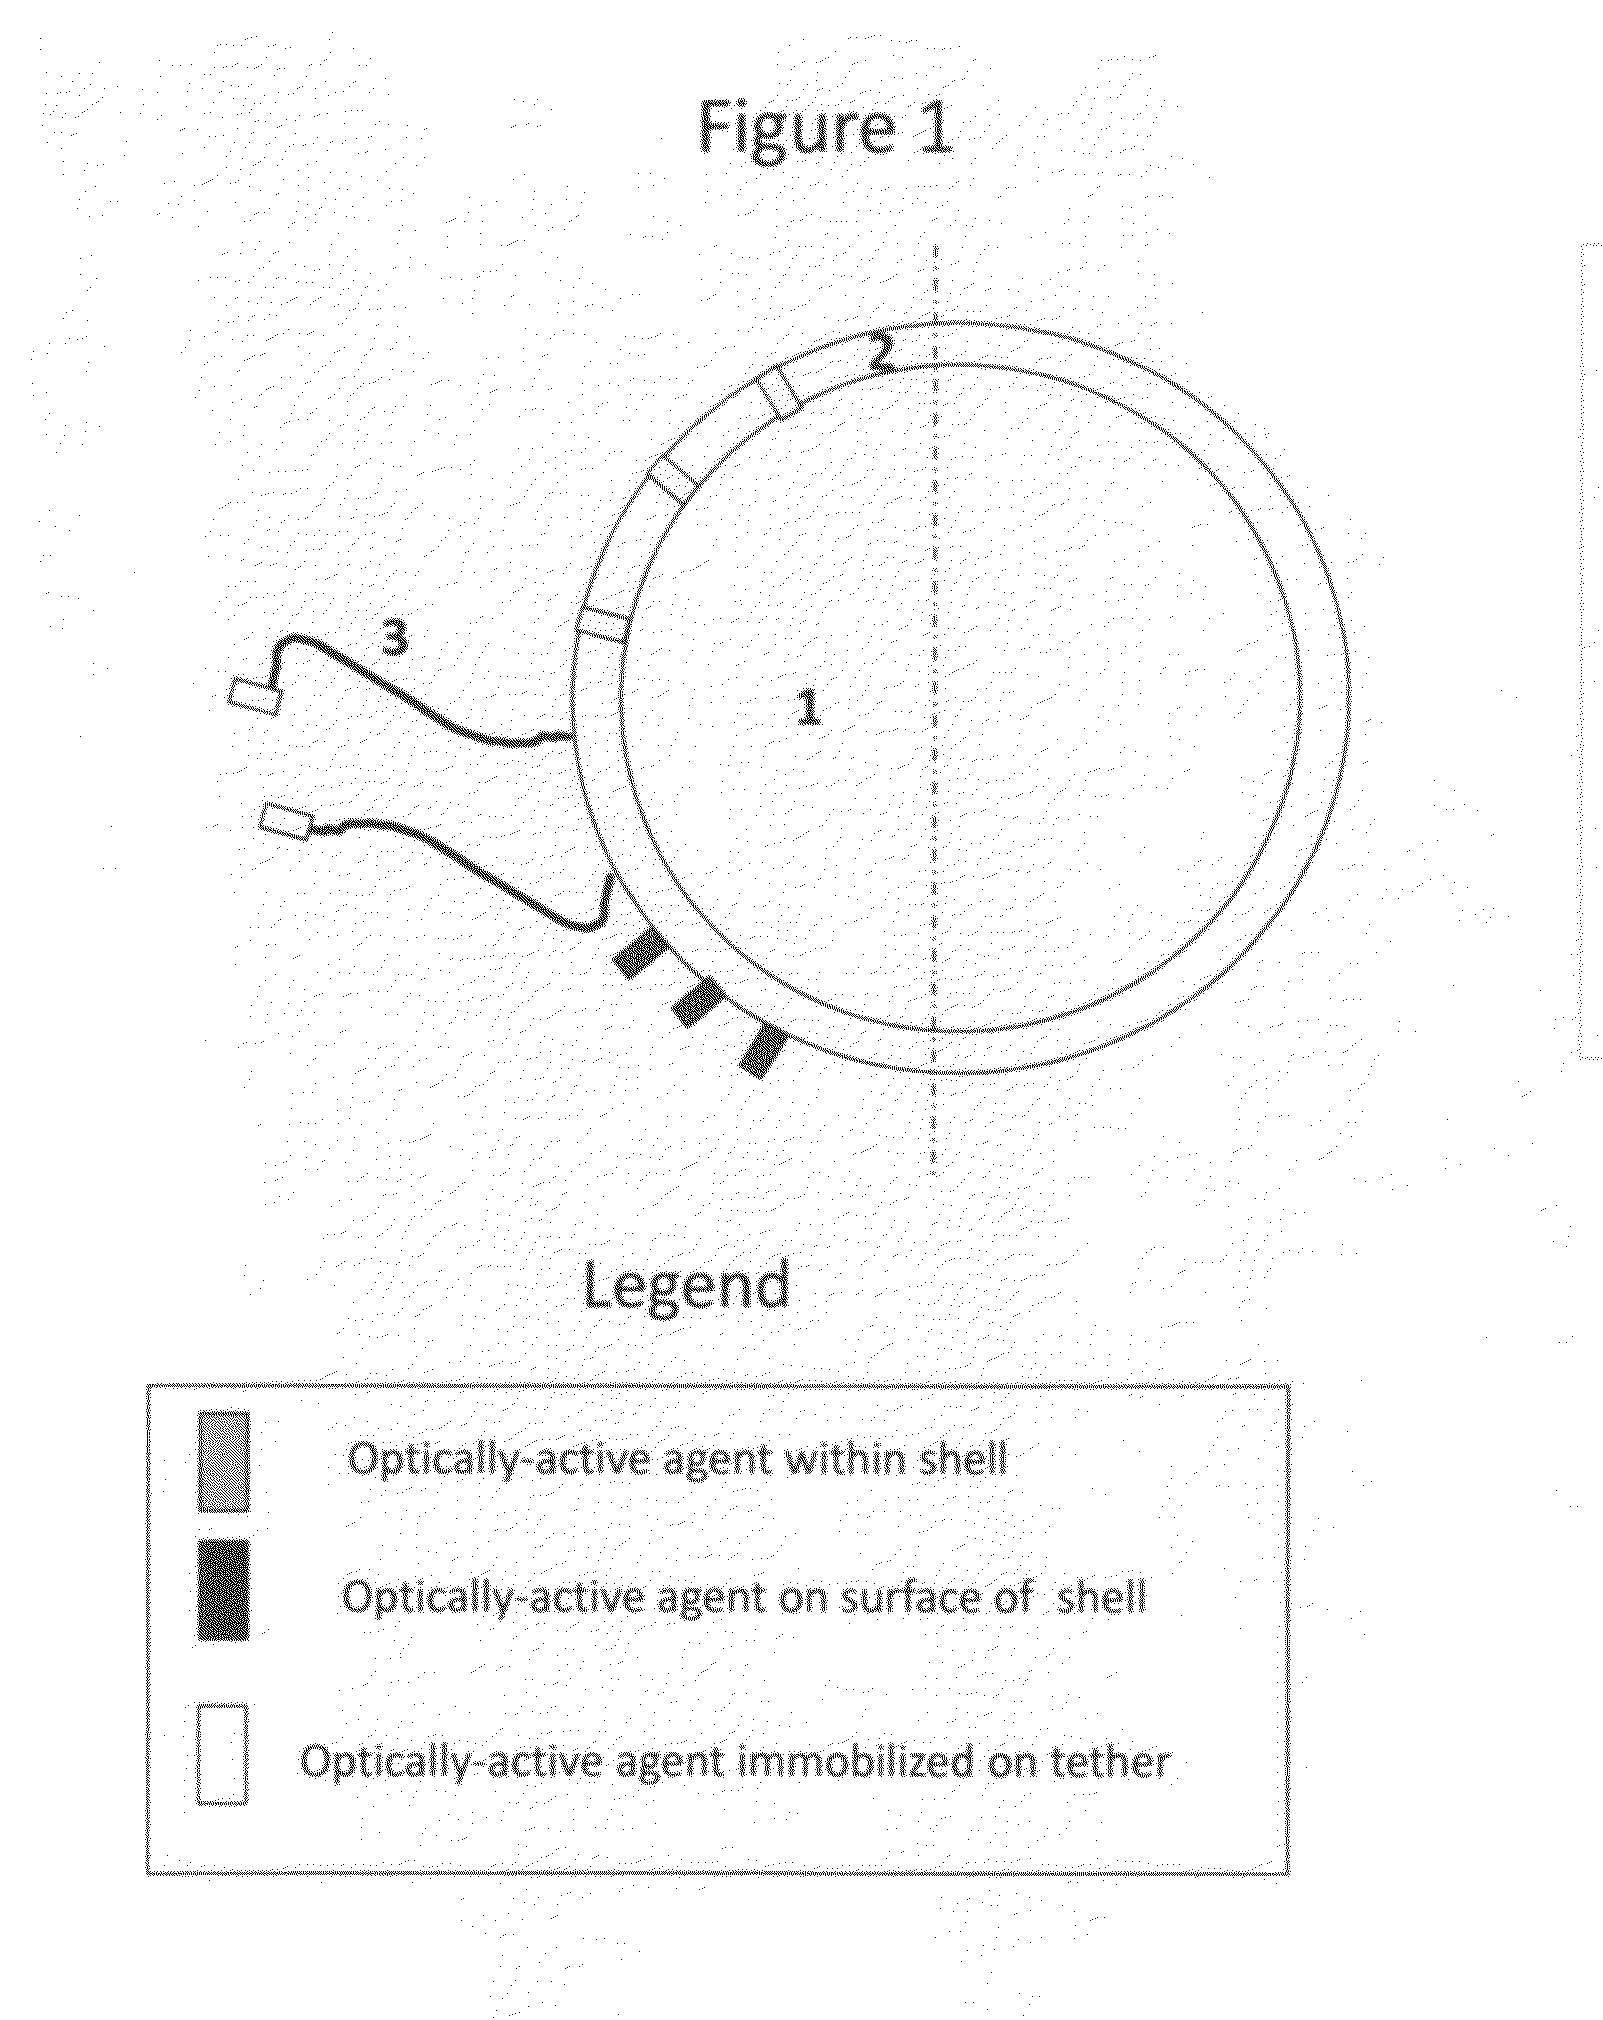 Optical imaging contrast agents and uses thereof